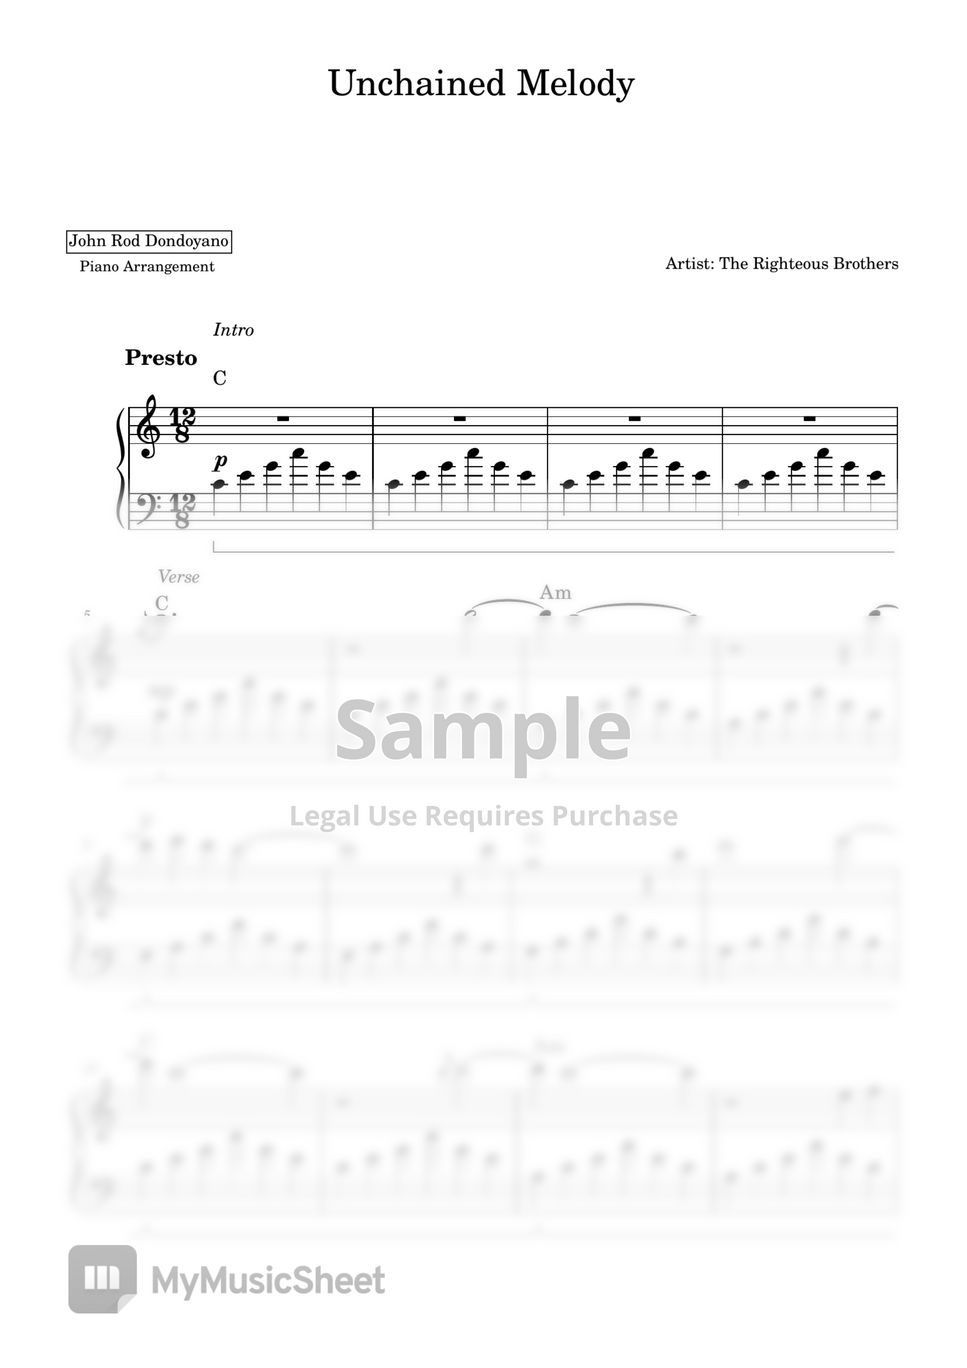 The Righteous Brothers Unchained Melody Piano Sheet Sheets By John Rod Dondoyano